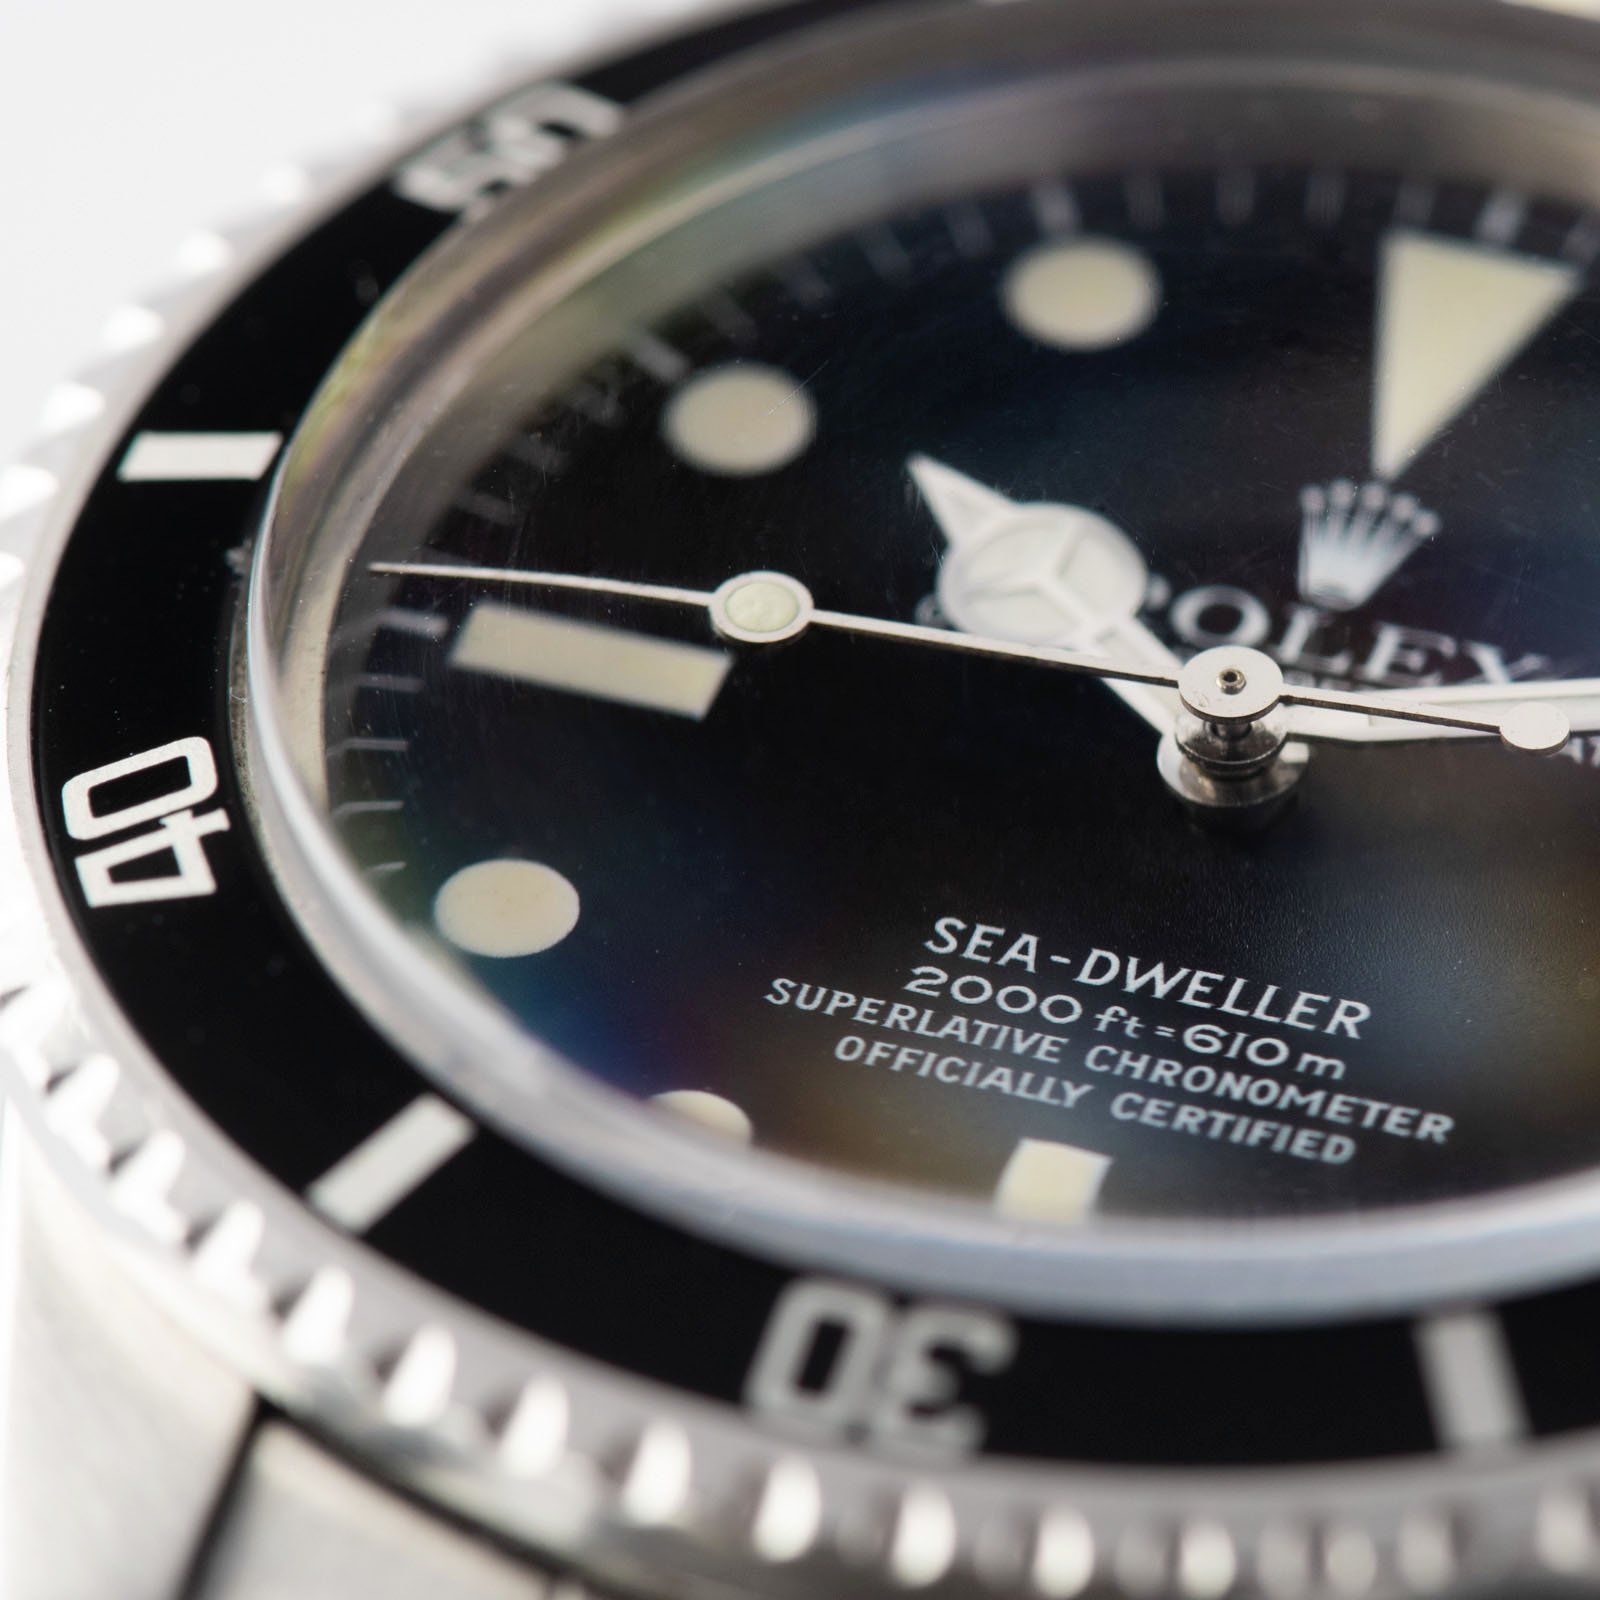 Rolex Seadweller Great White Reference 1665